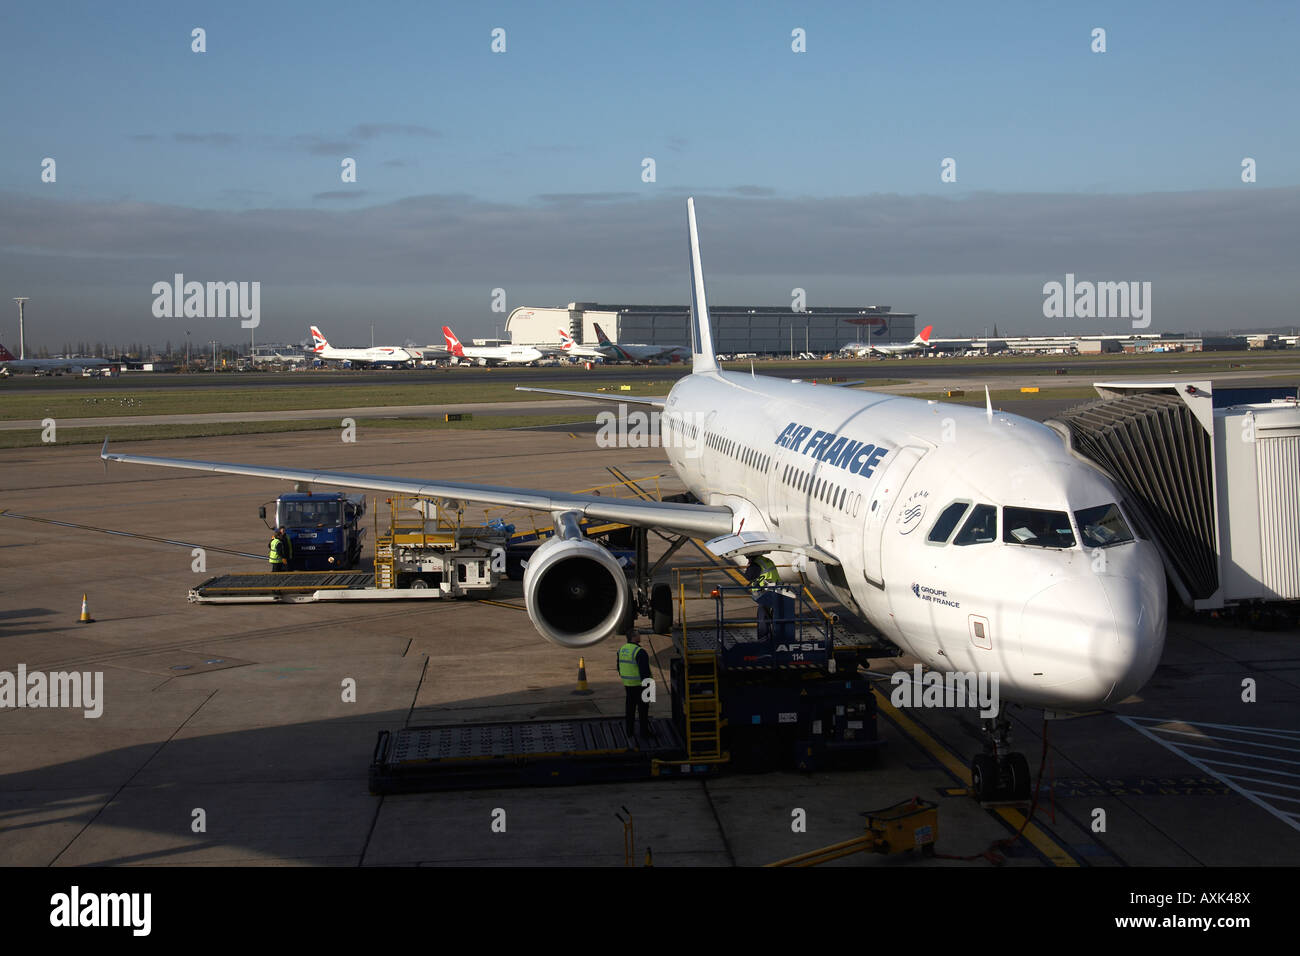 Airbus aircraft being loaded up pre flight airside at Heathrow airport London England UK Stock Photo